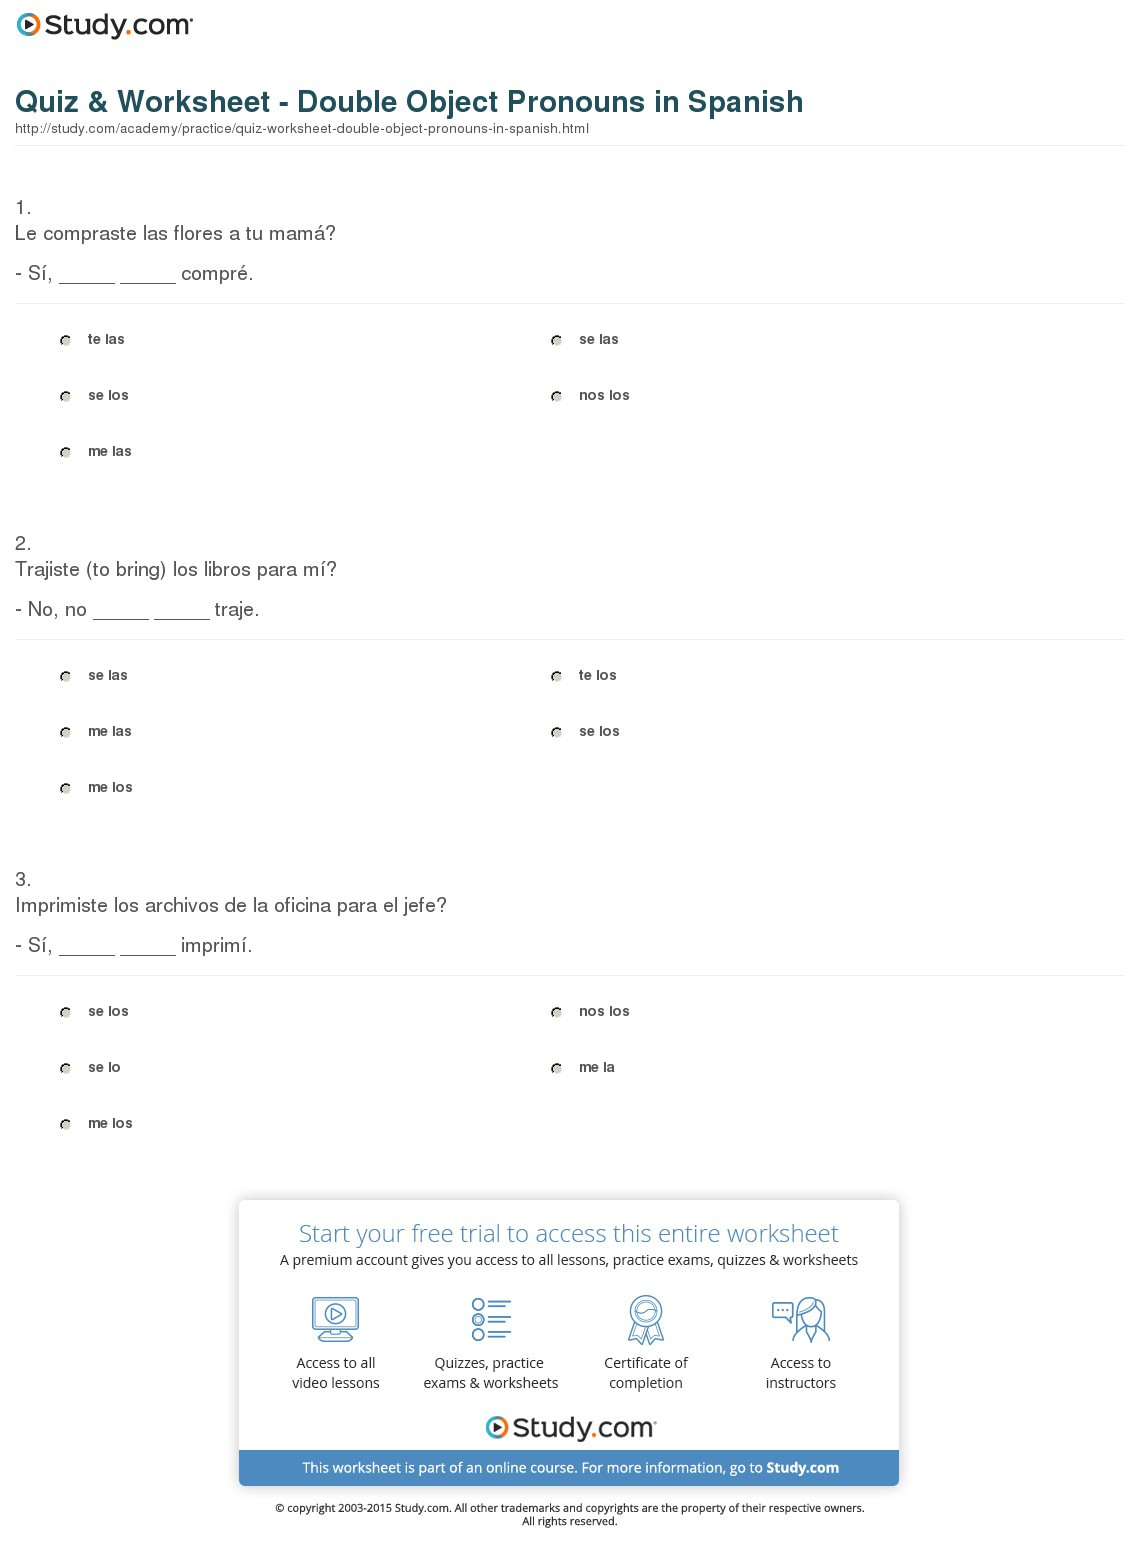 Double Object Pronouns Spanish Worksheet Db excel